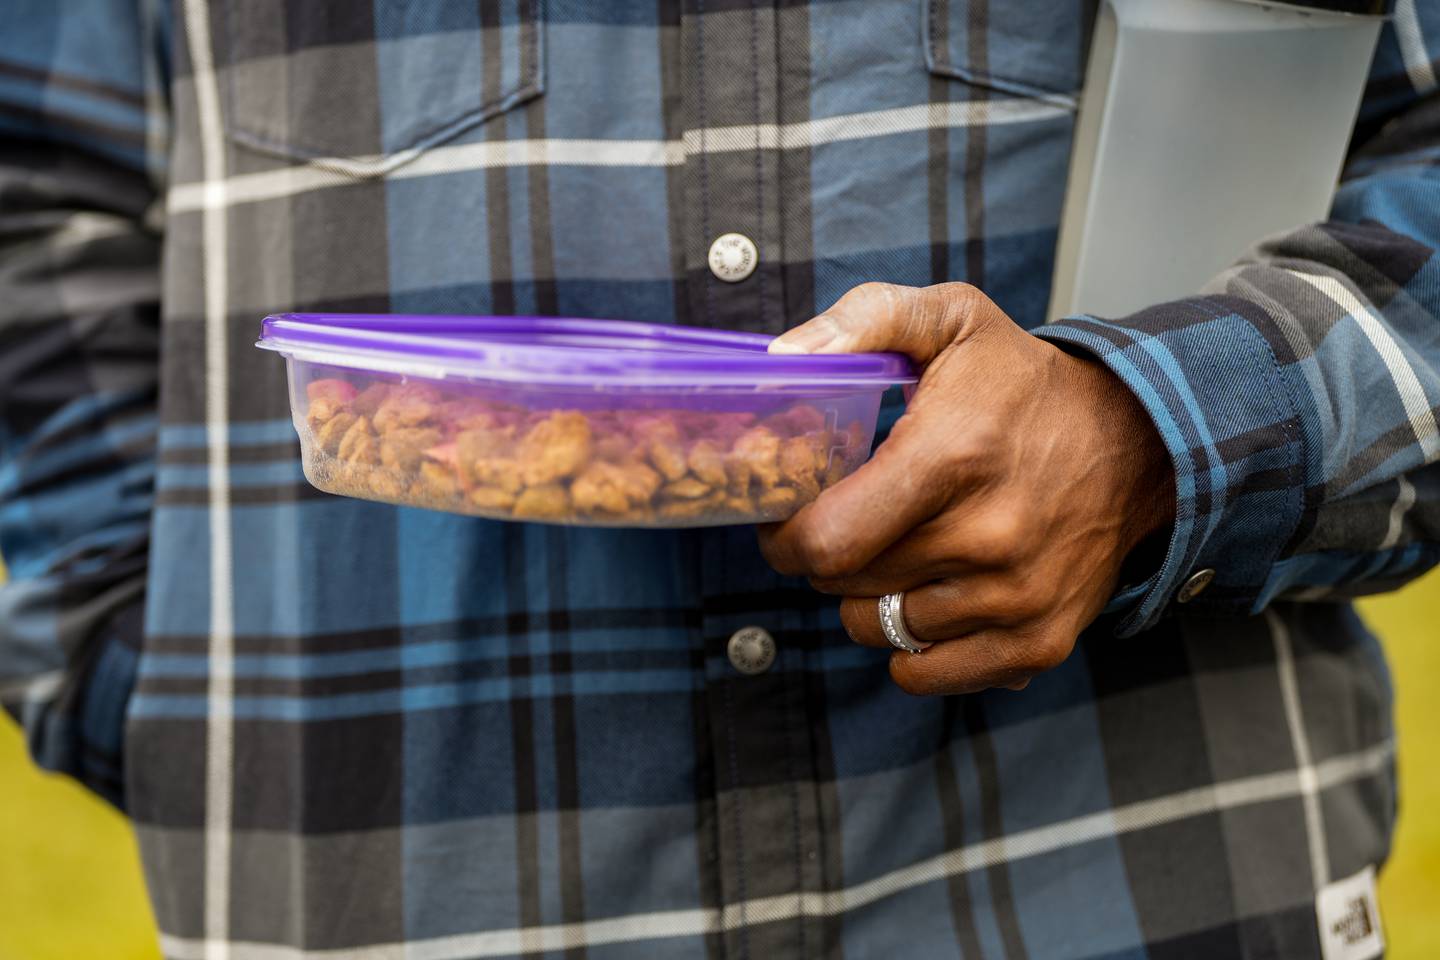 Man holds dog food in a plastic Tupperware container to feed a lost dog.